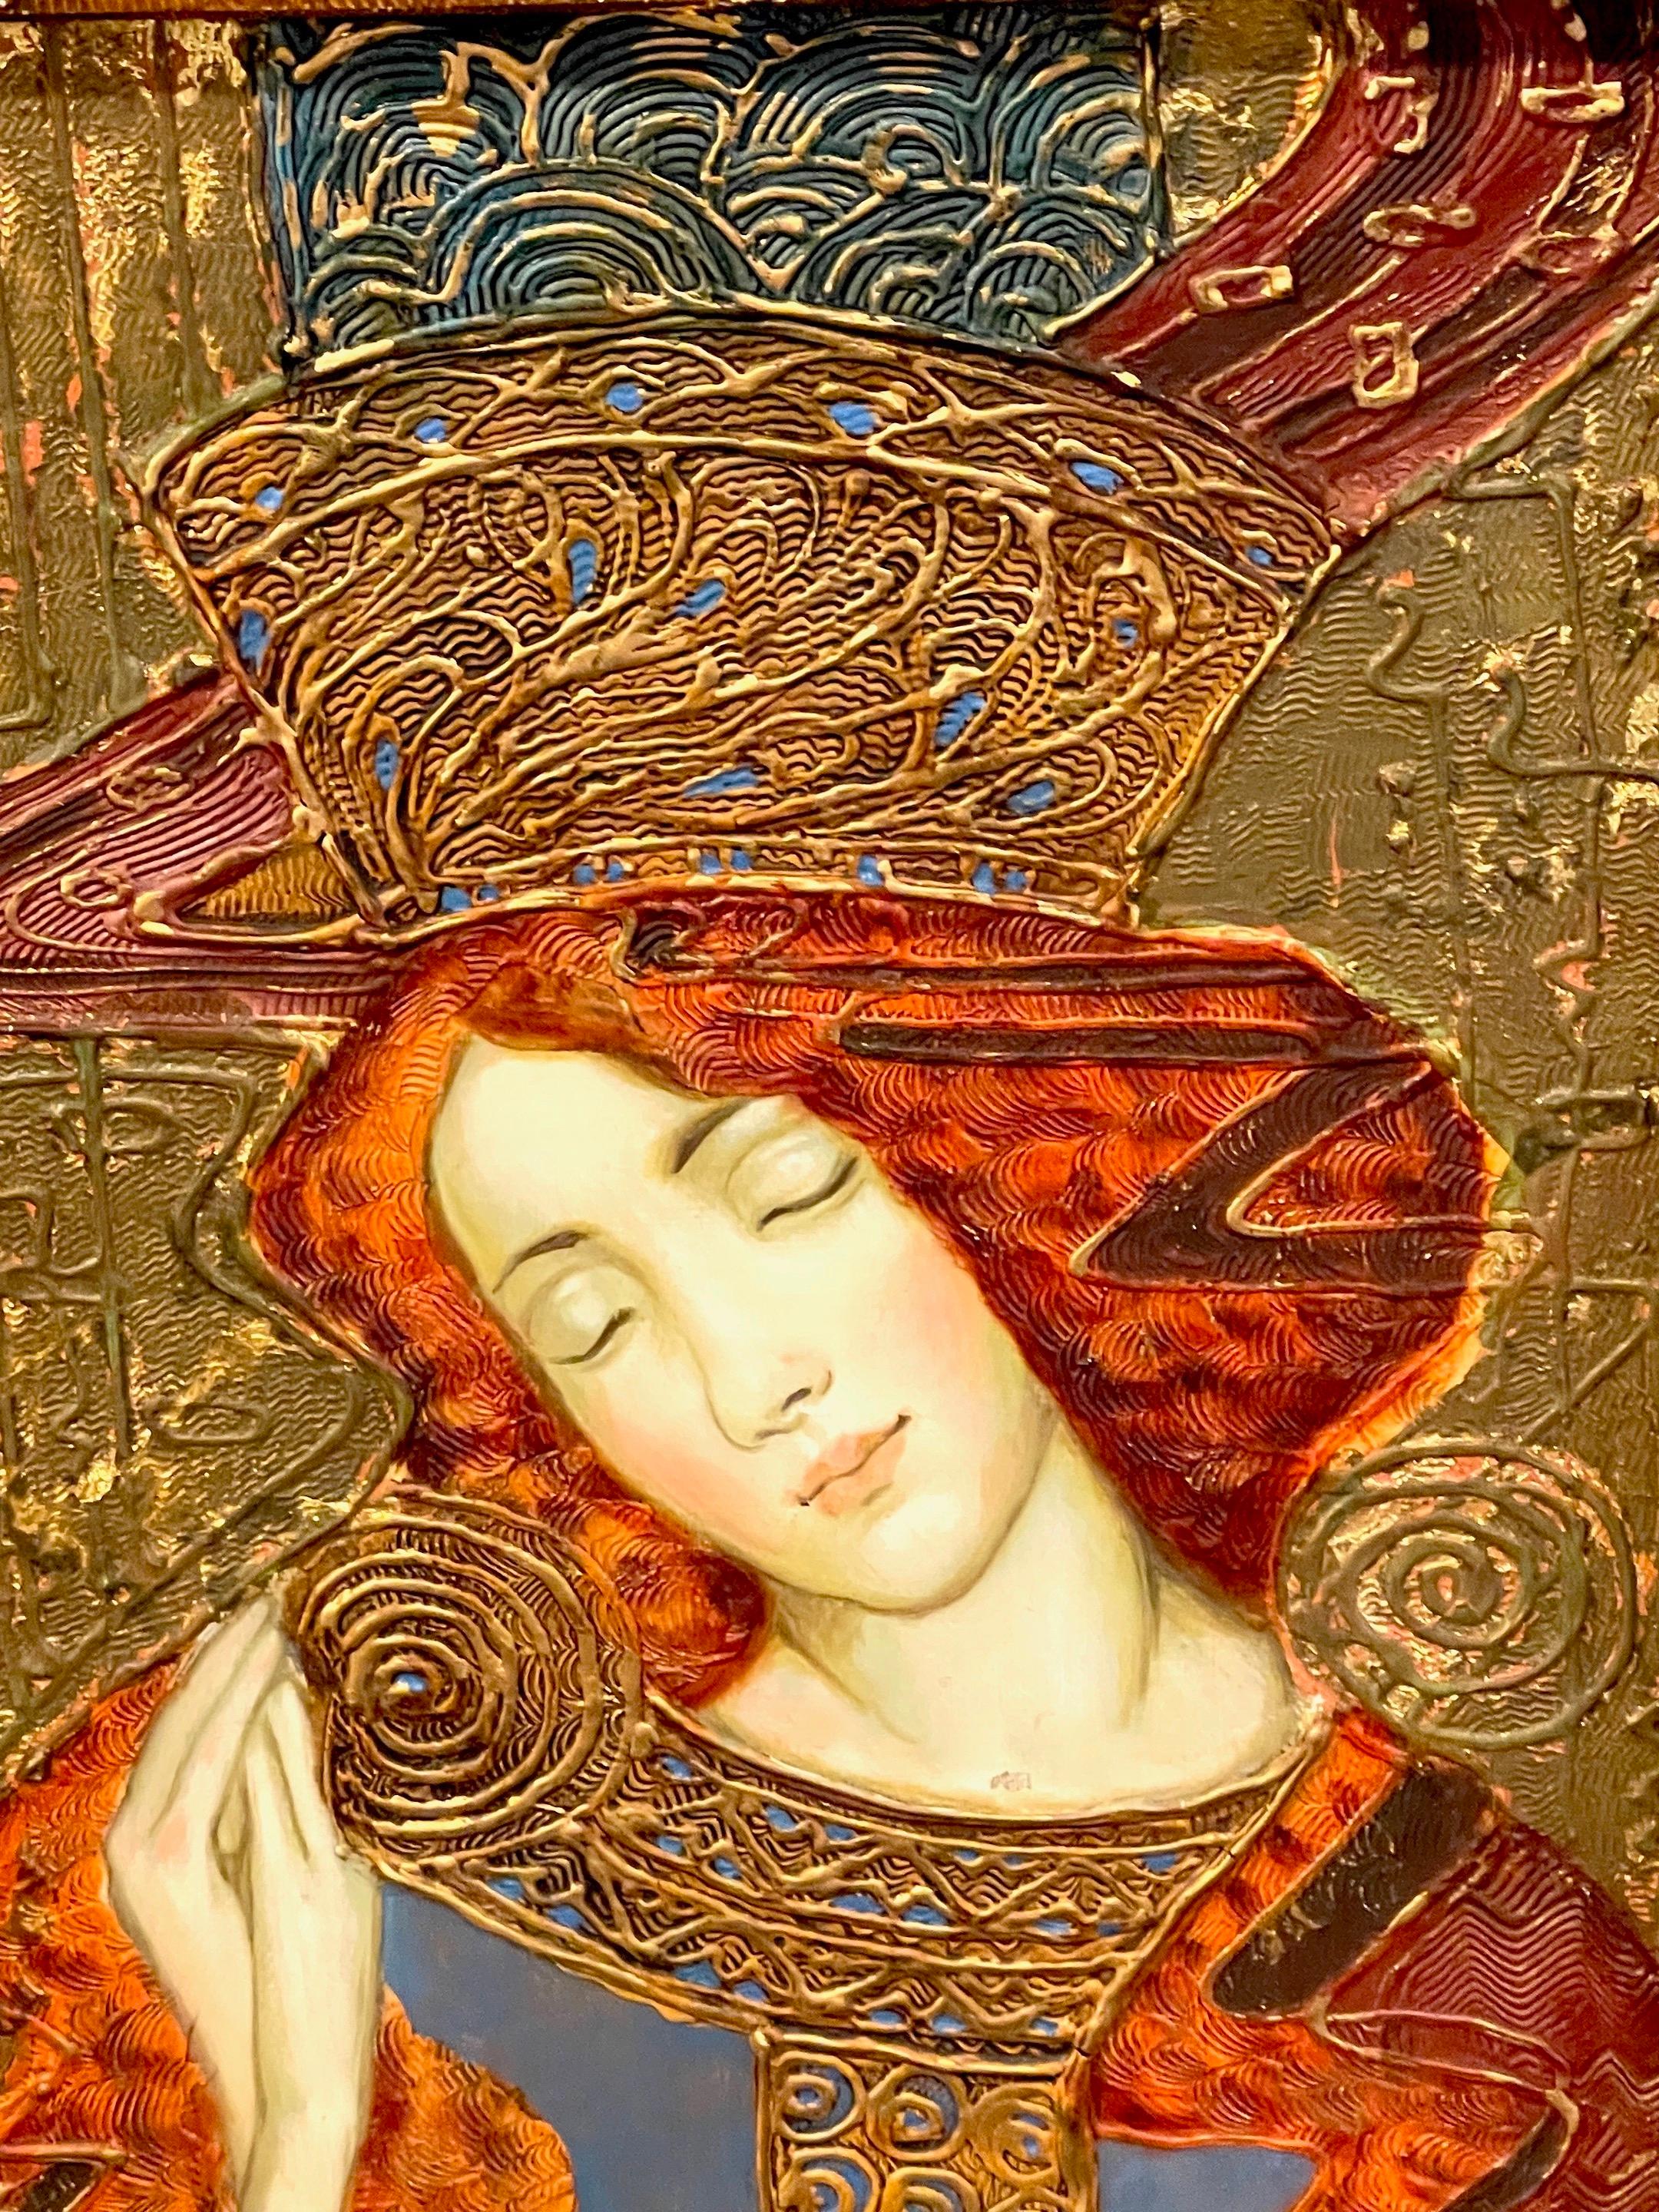 Art Nouveau Russian Icon Style Painting 'The Thousand Dreams' by Eugeniy Titov, 2008